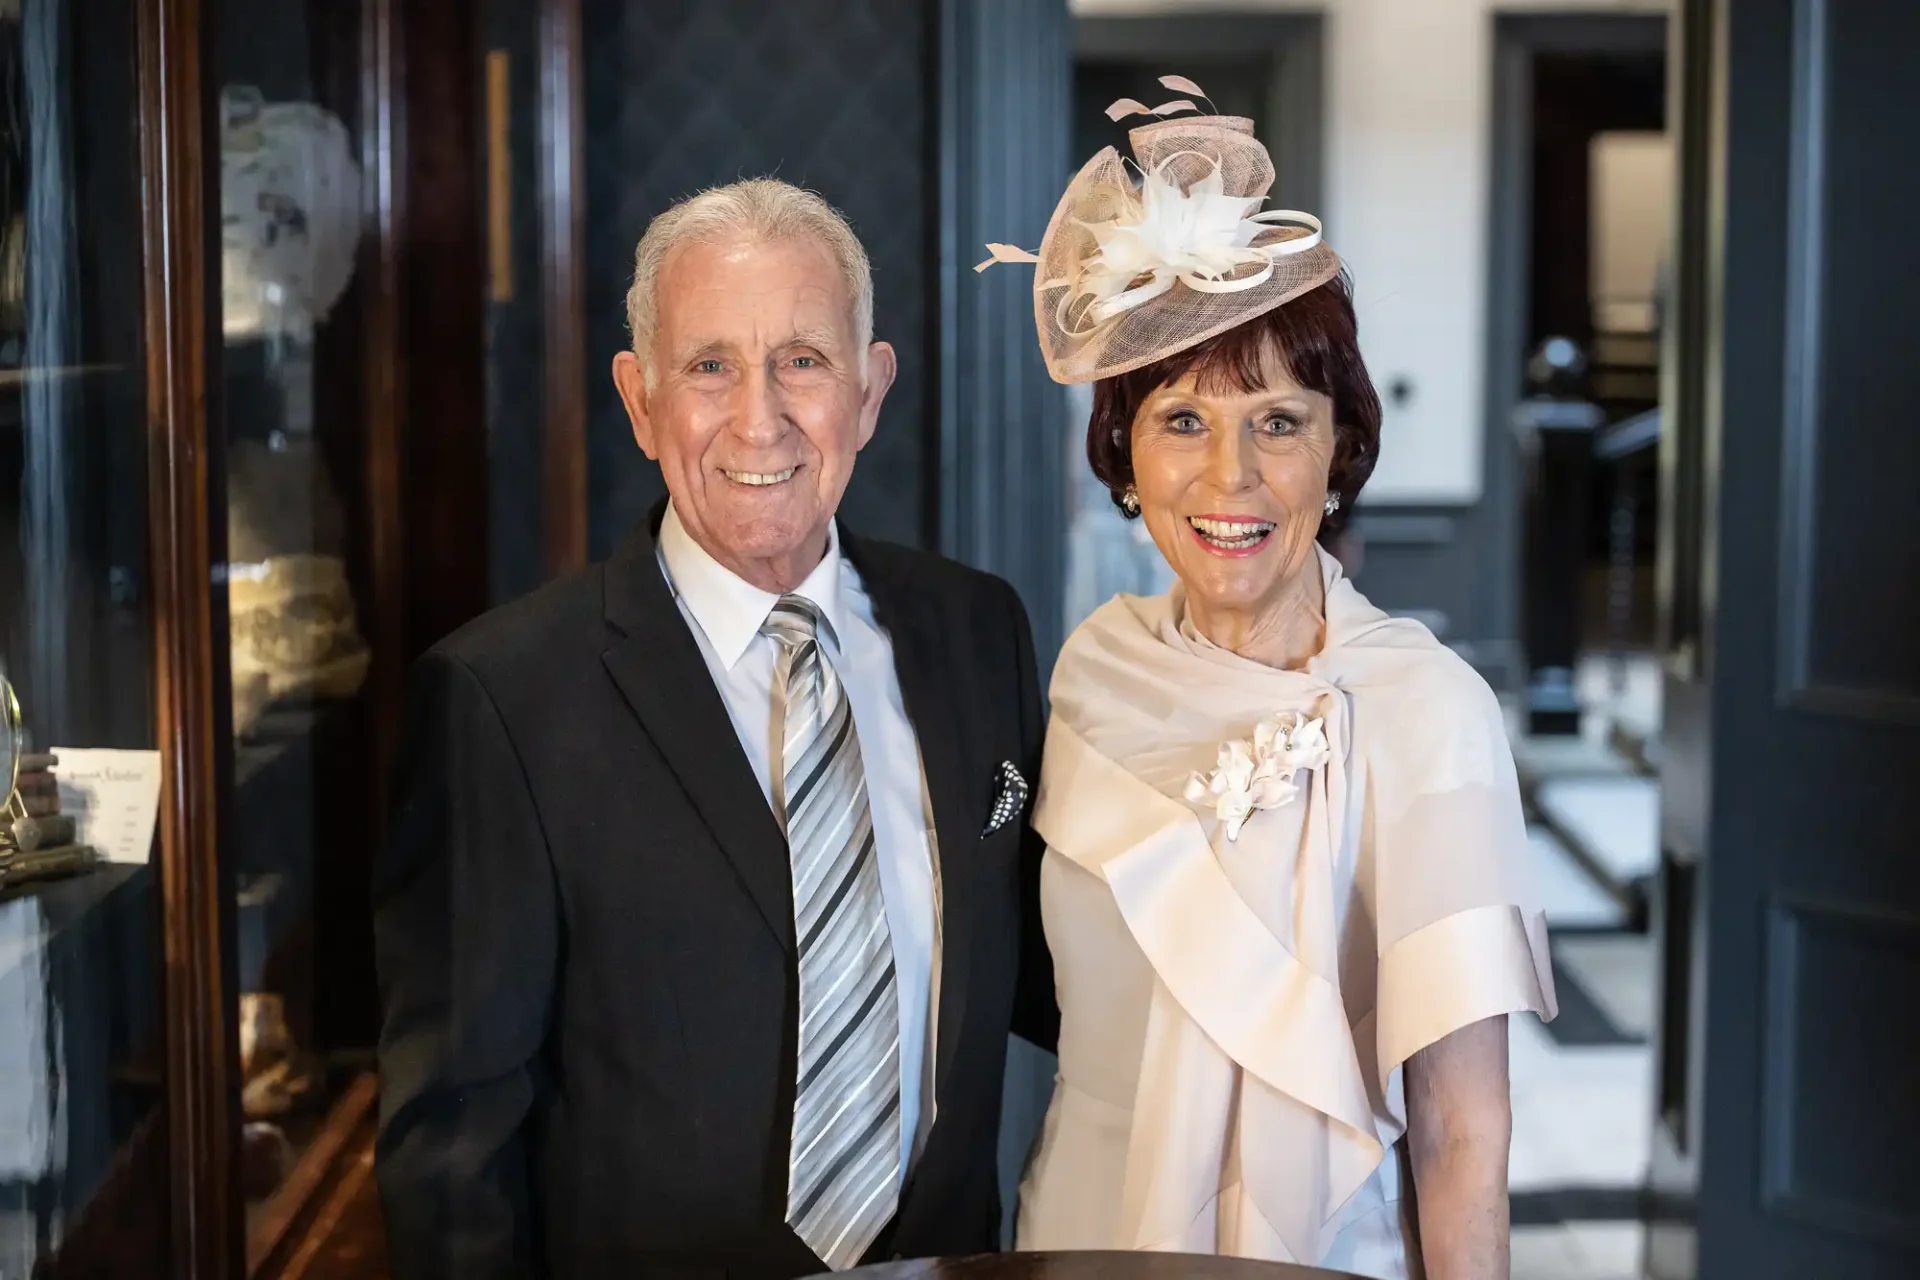 An elderly couple dressed in formal attire smiling indoors, the woman wears a hat with a feather decoration, and the man is in a suit and tie.